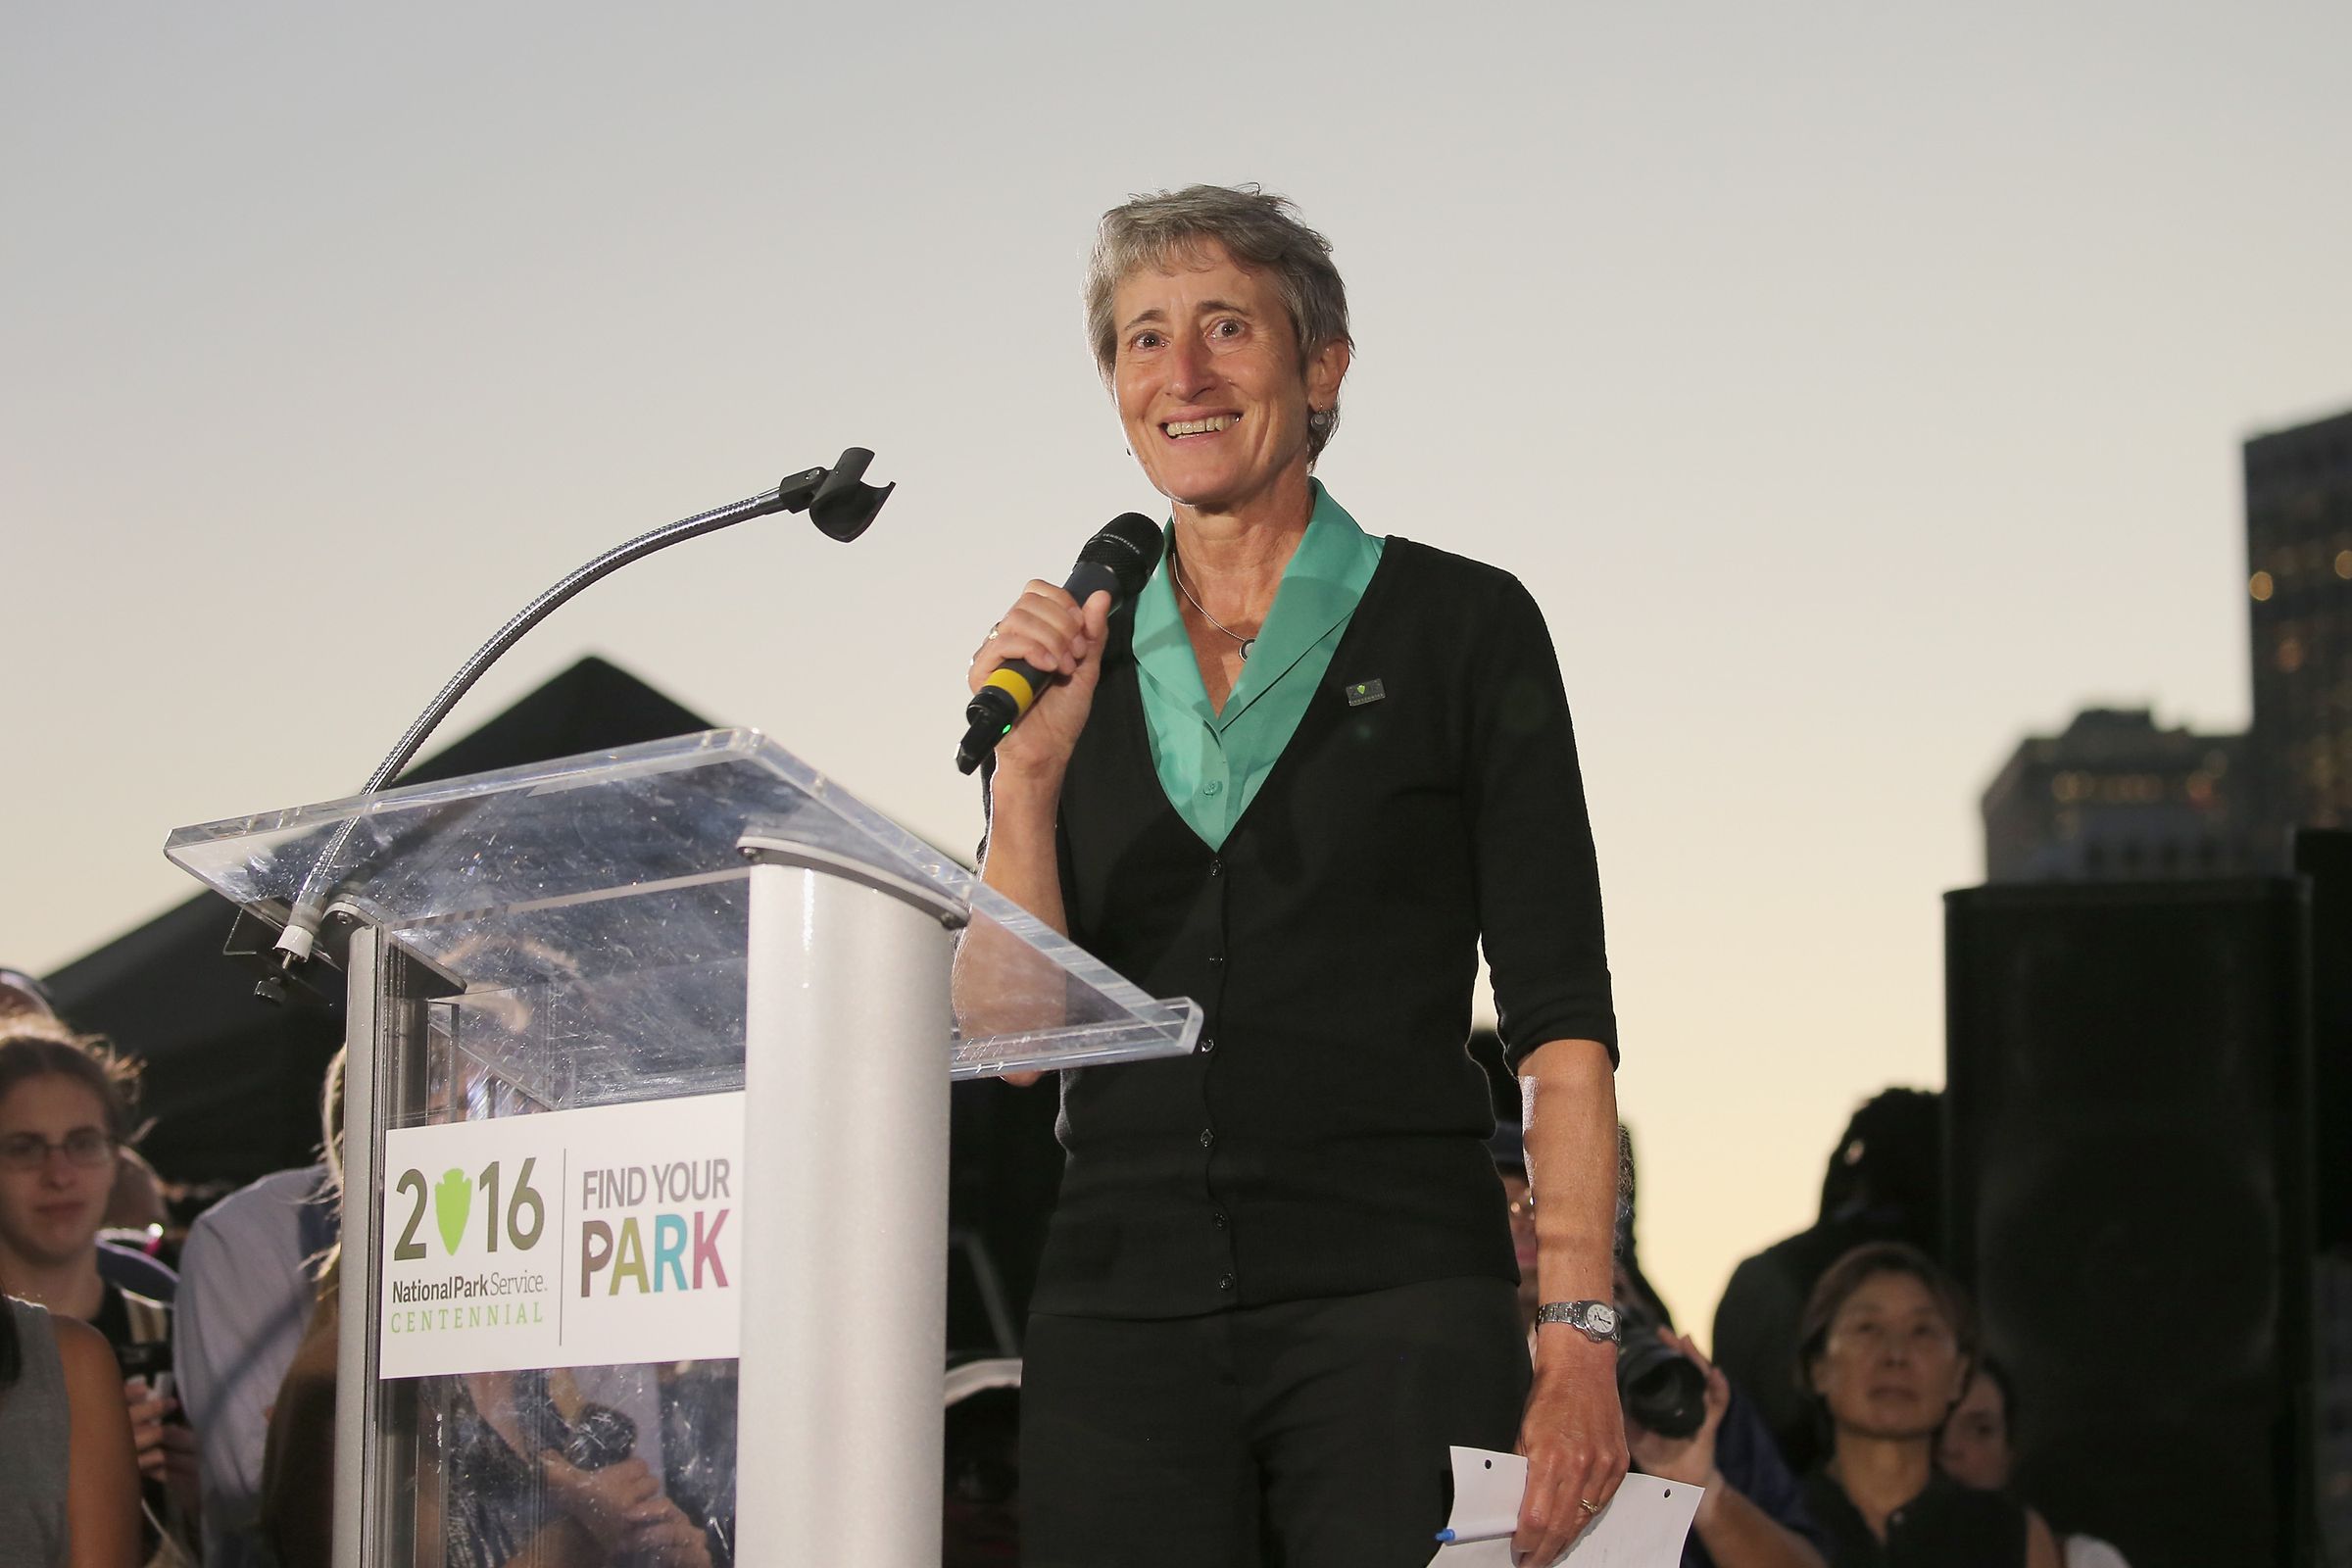 Bill Nye, Questlove, Jewell at the National Park Foundation's Find Your Park Event, Celebrating for National Park Service Centennial